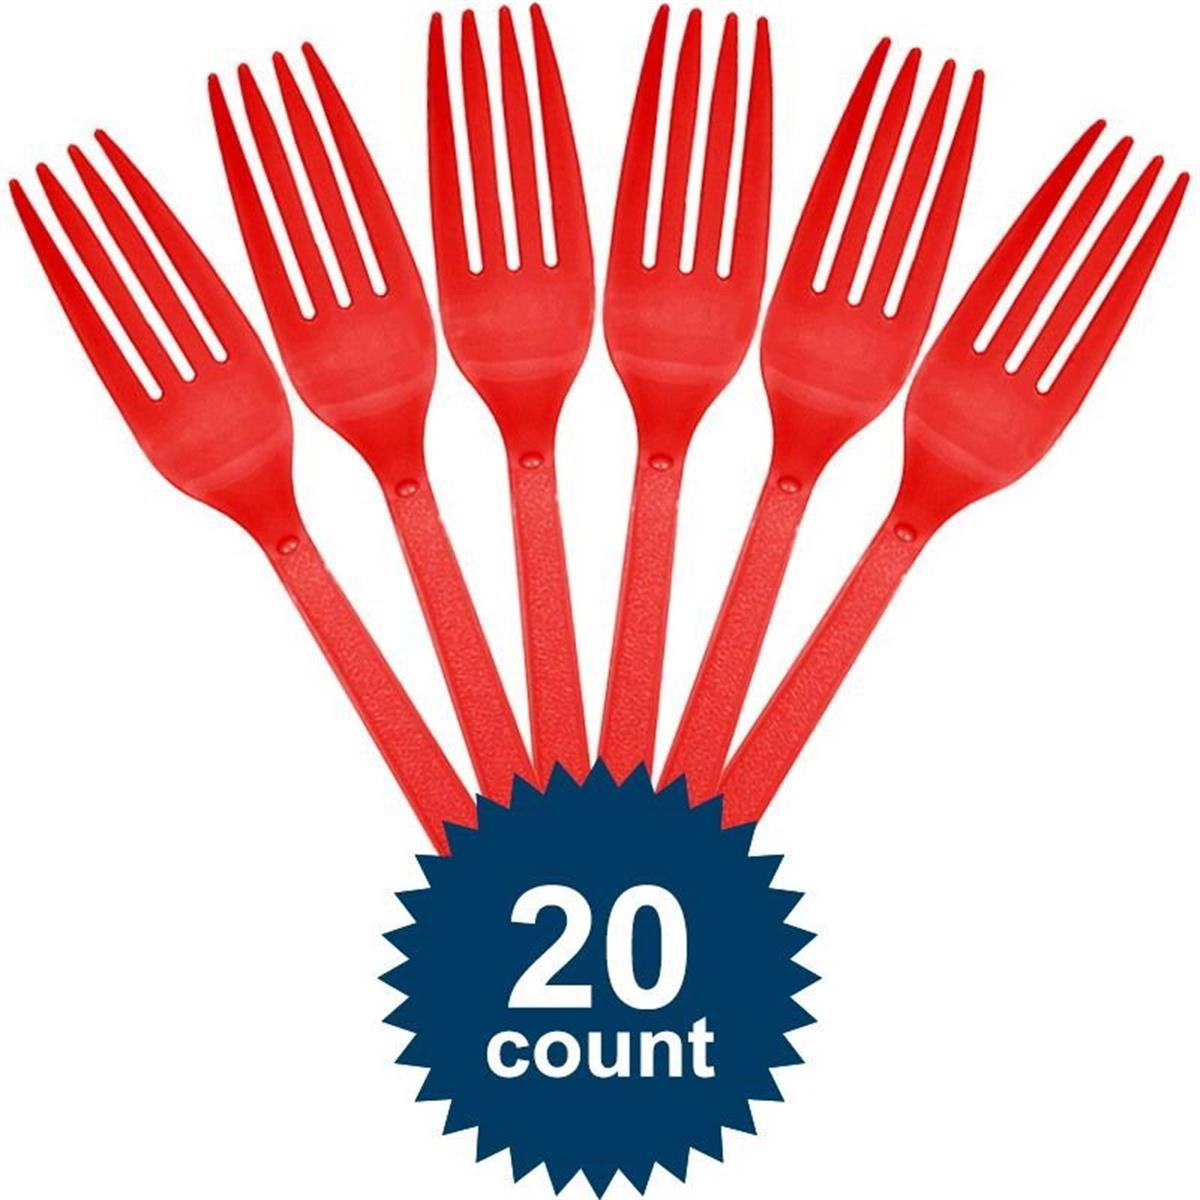 Picture of Amscan 265725 Red Plastic Fork